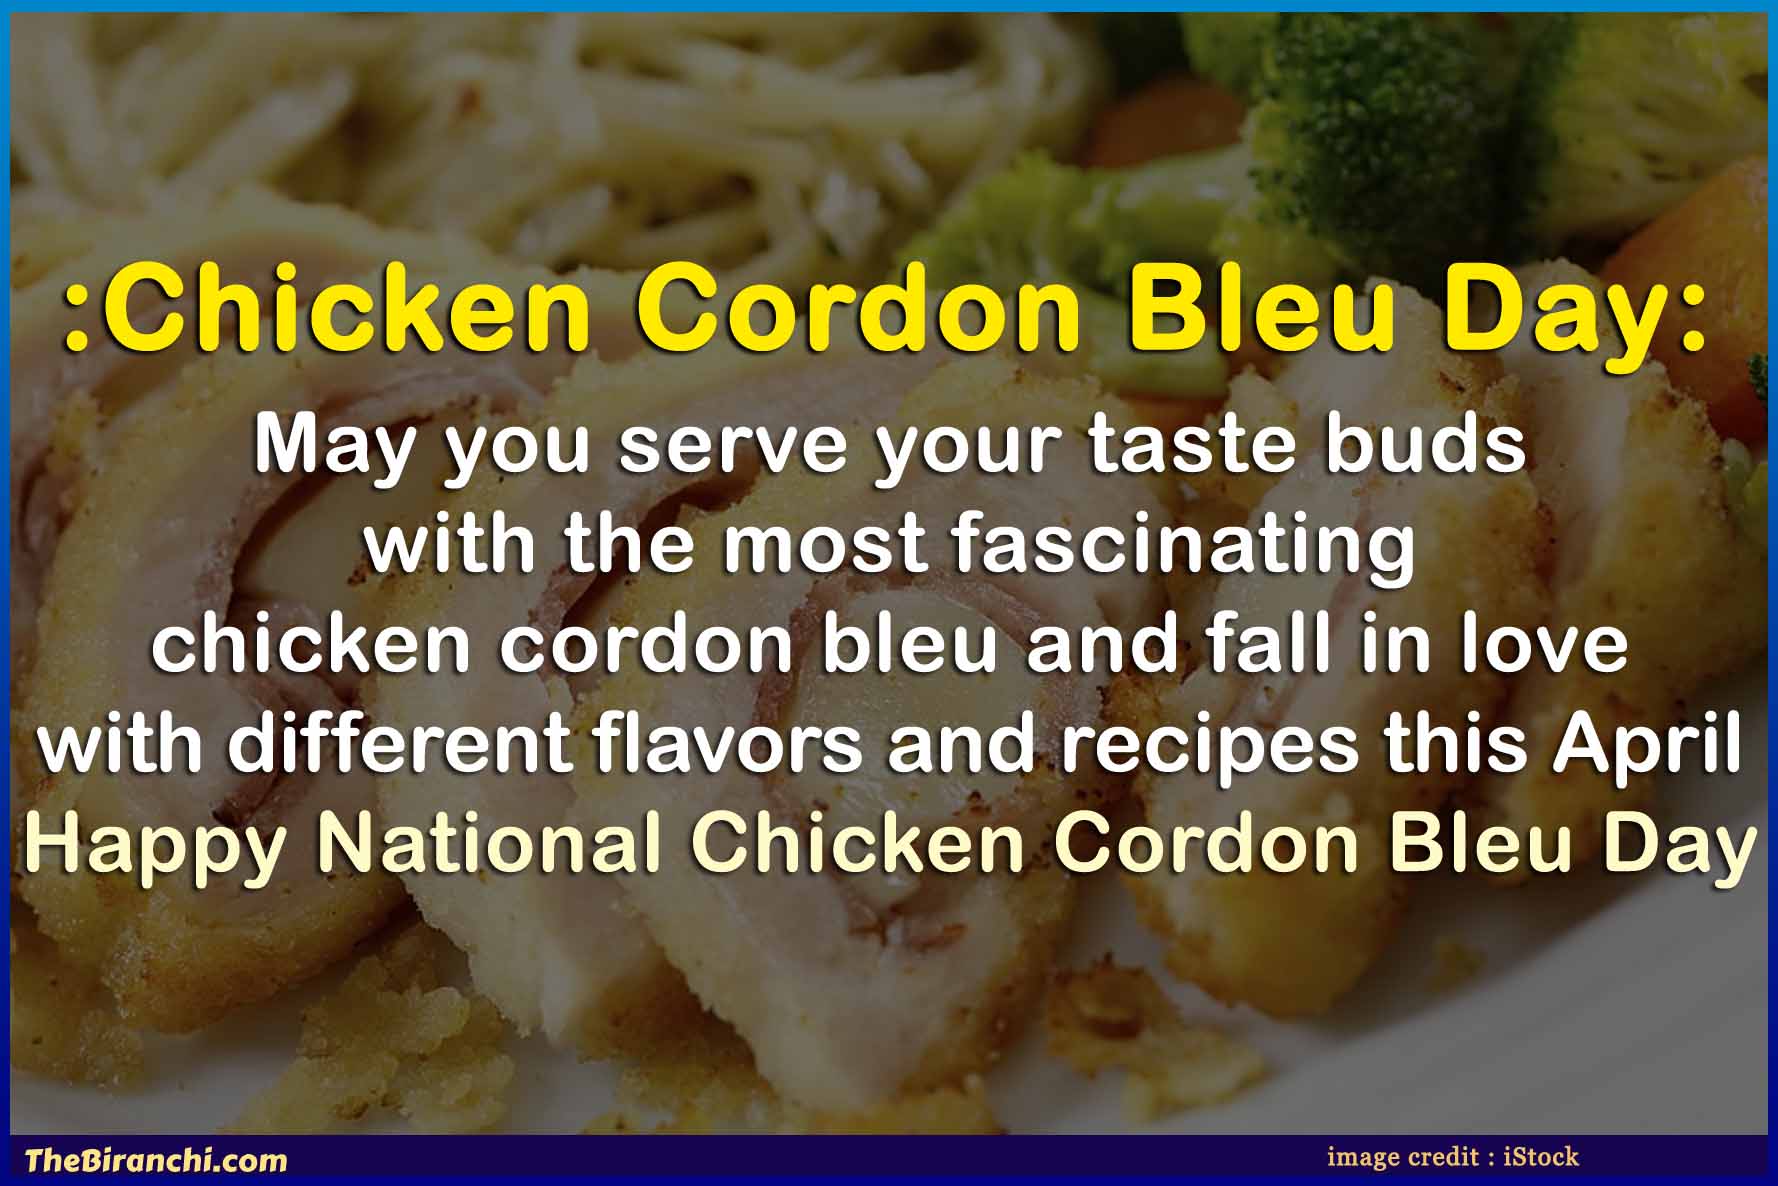 May-you-serve-the-most-fascinating-chicken-cordon-bleu-day-greetings